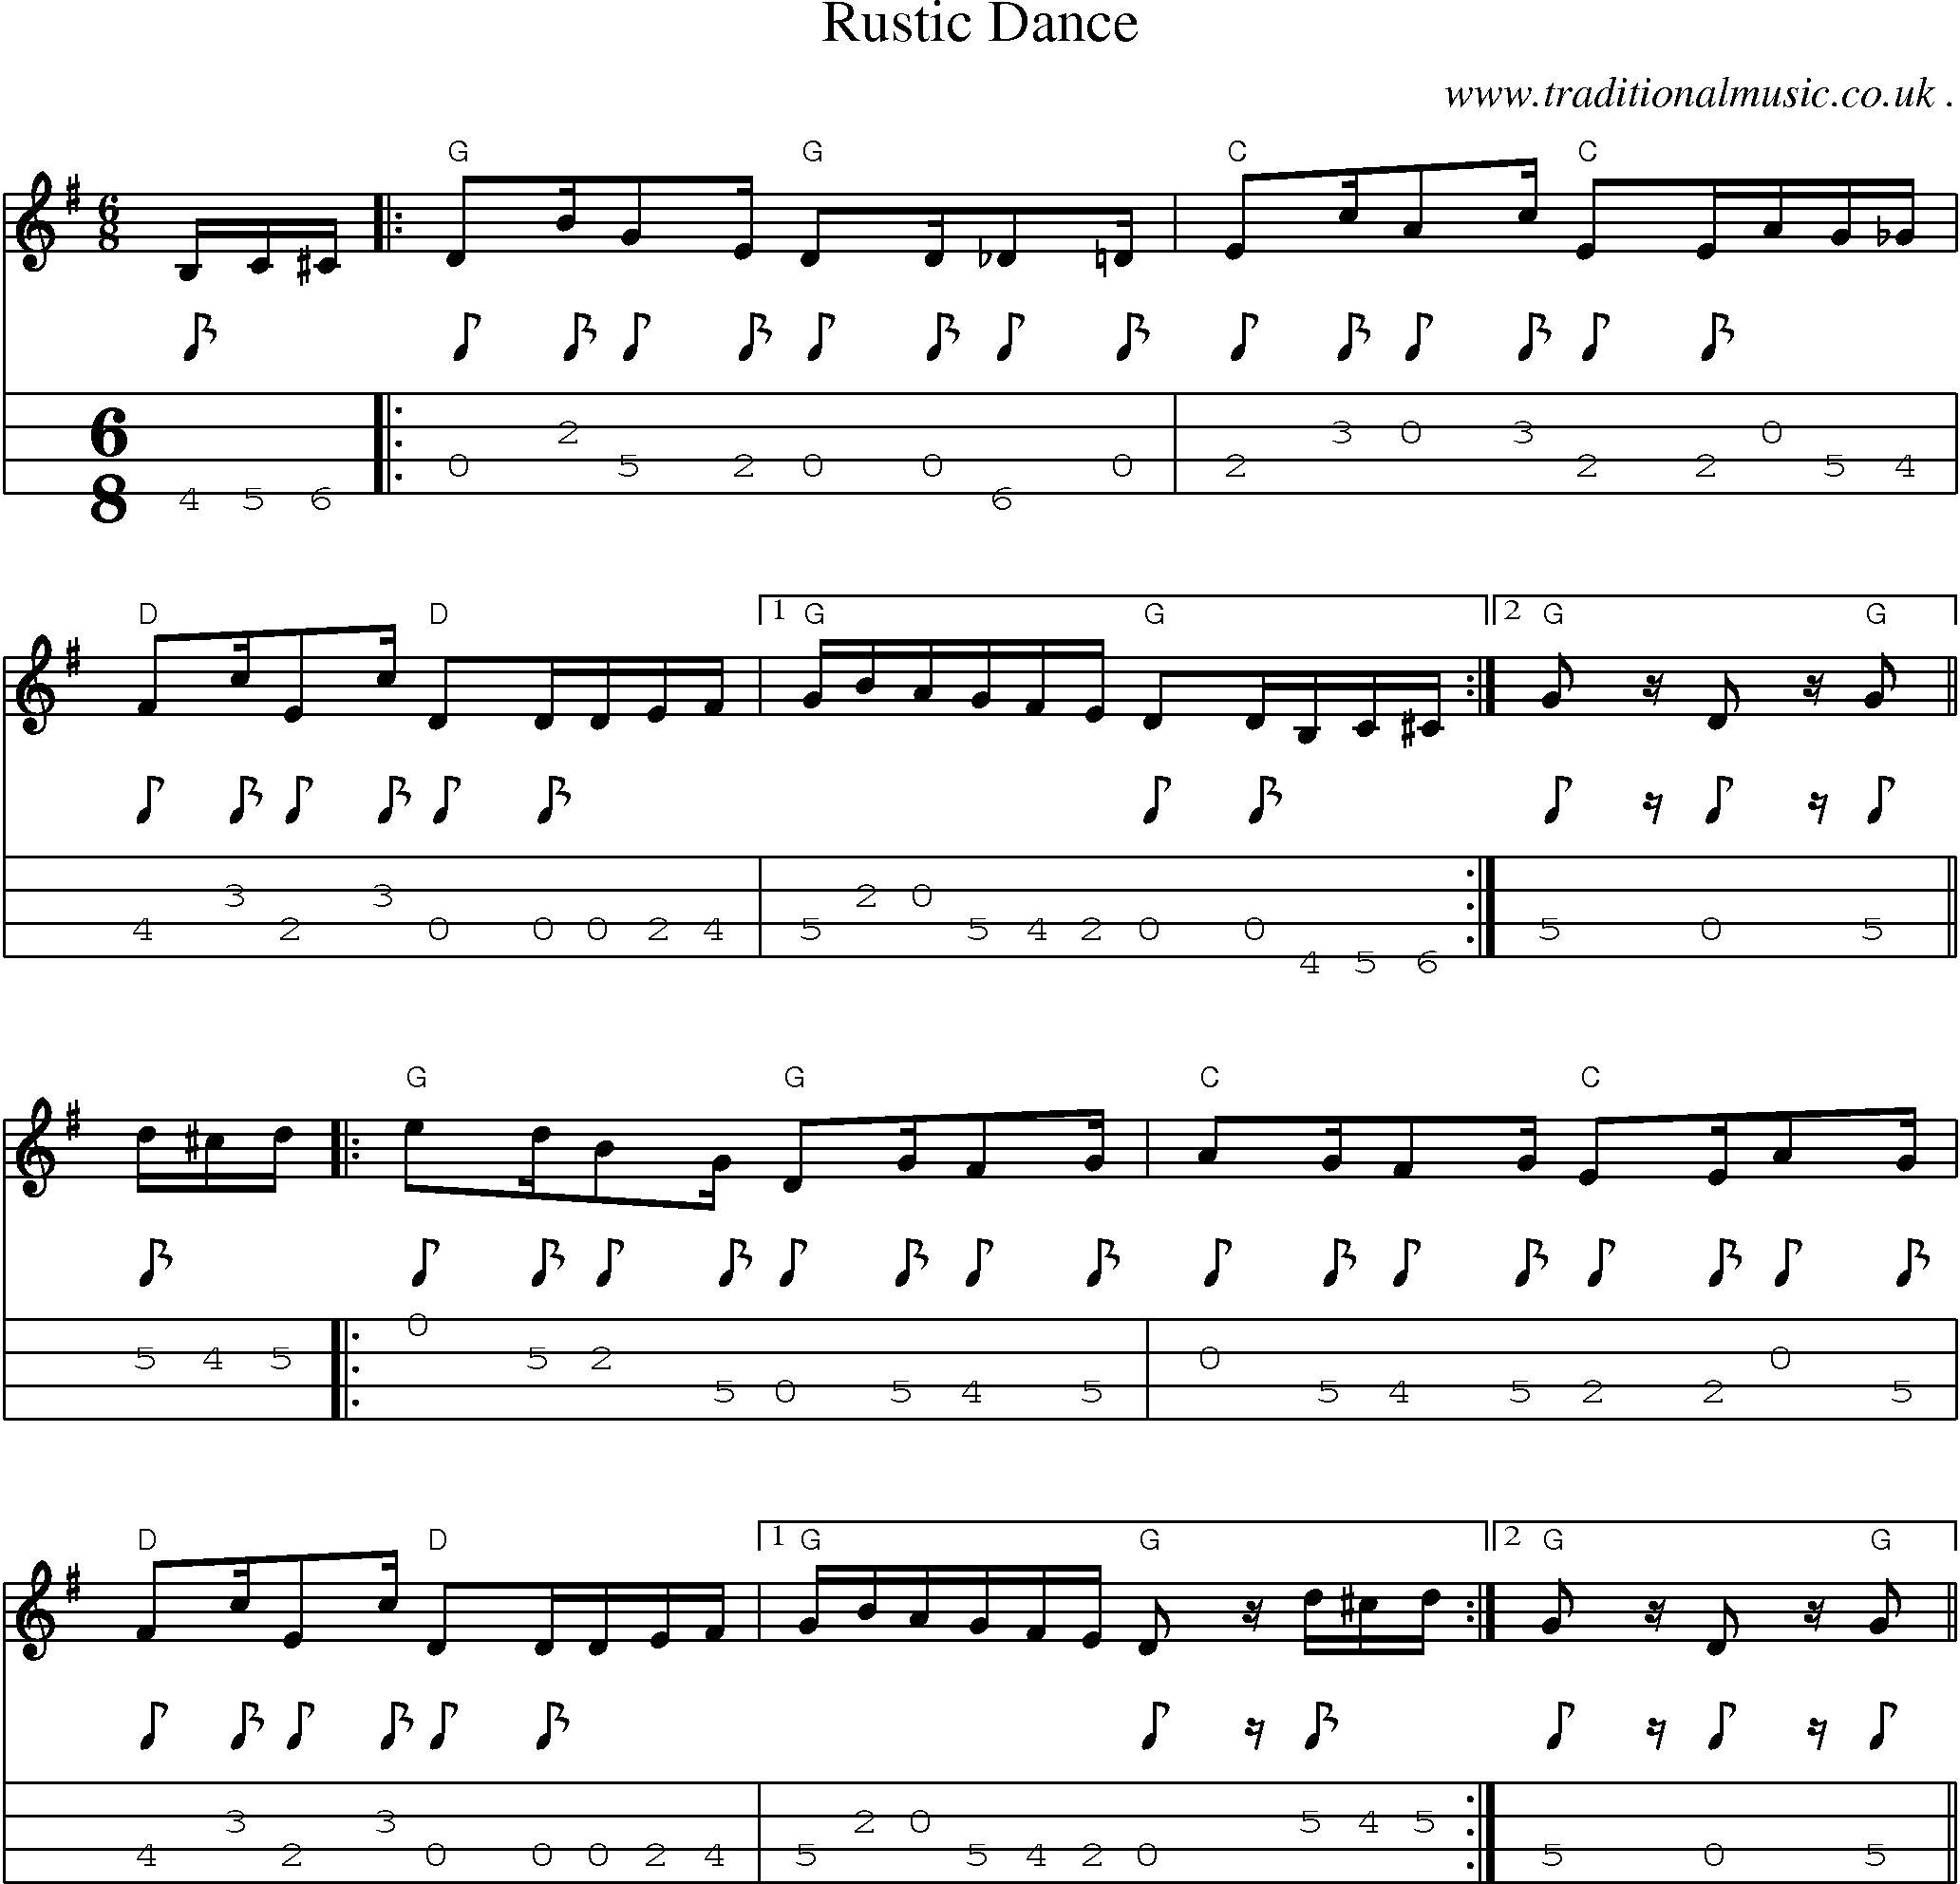 Music Score and Mandolin Tabs for Rustic Dance